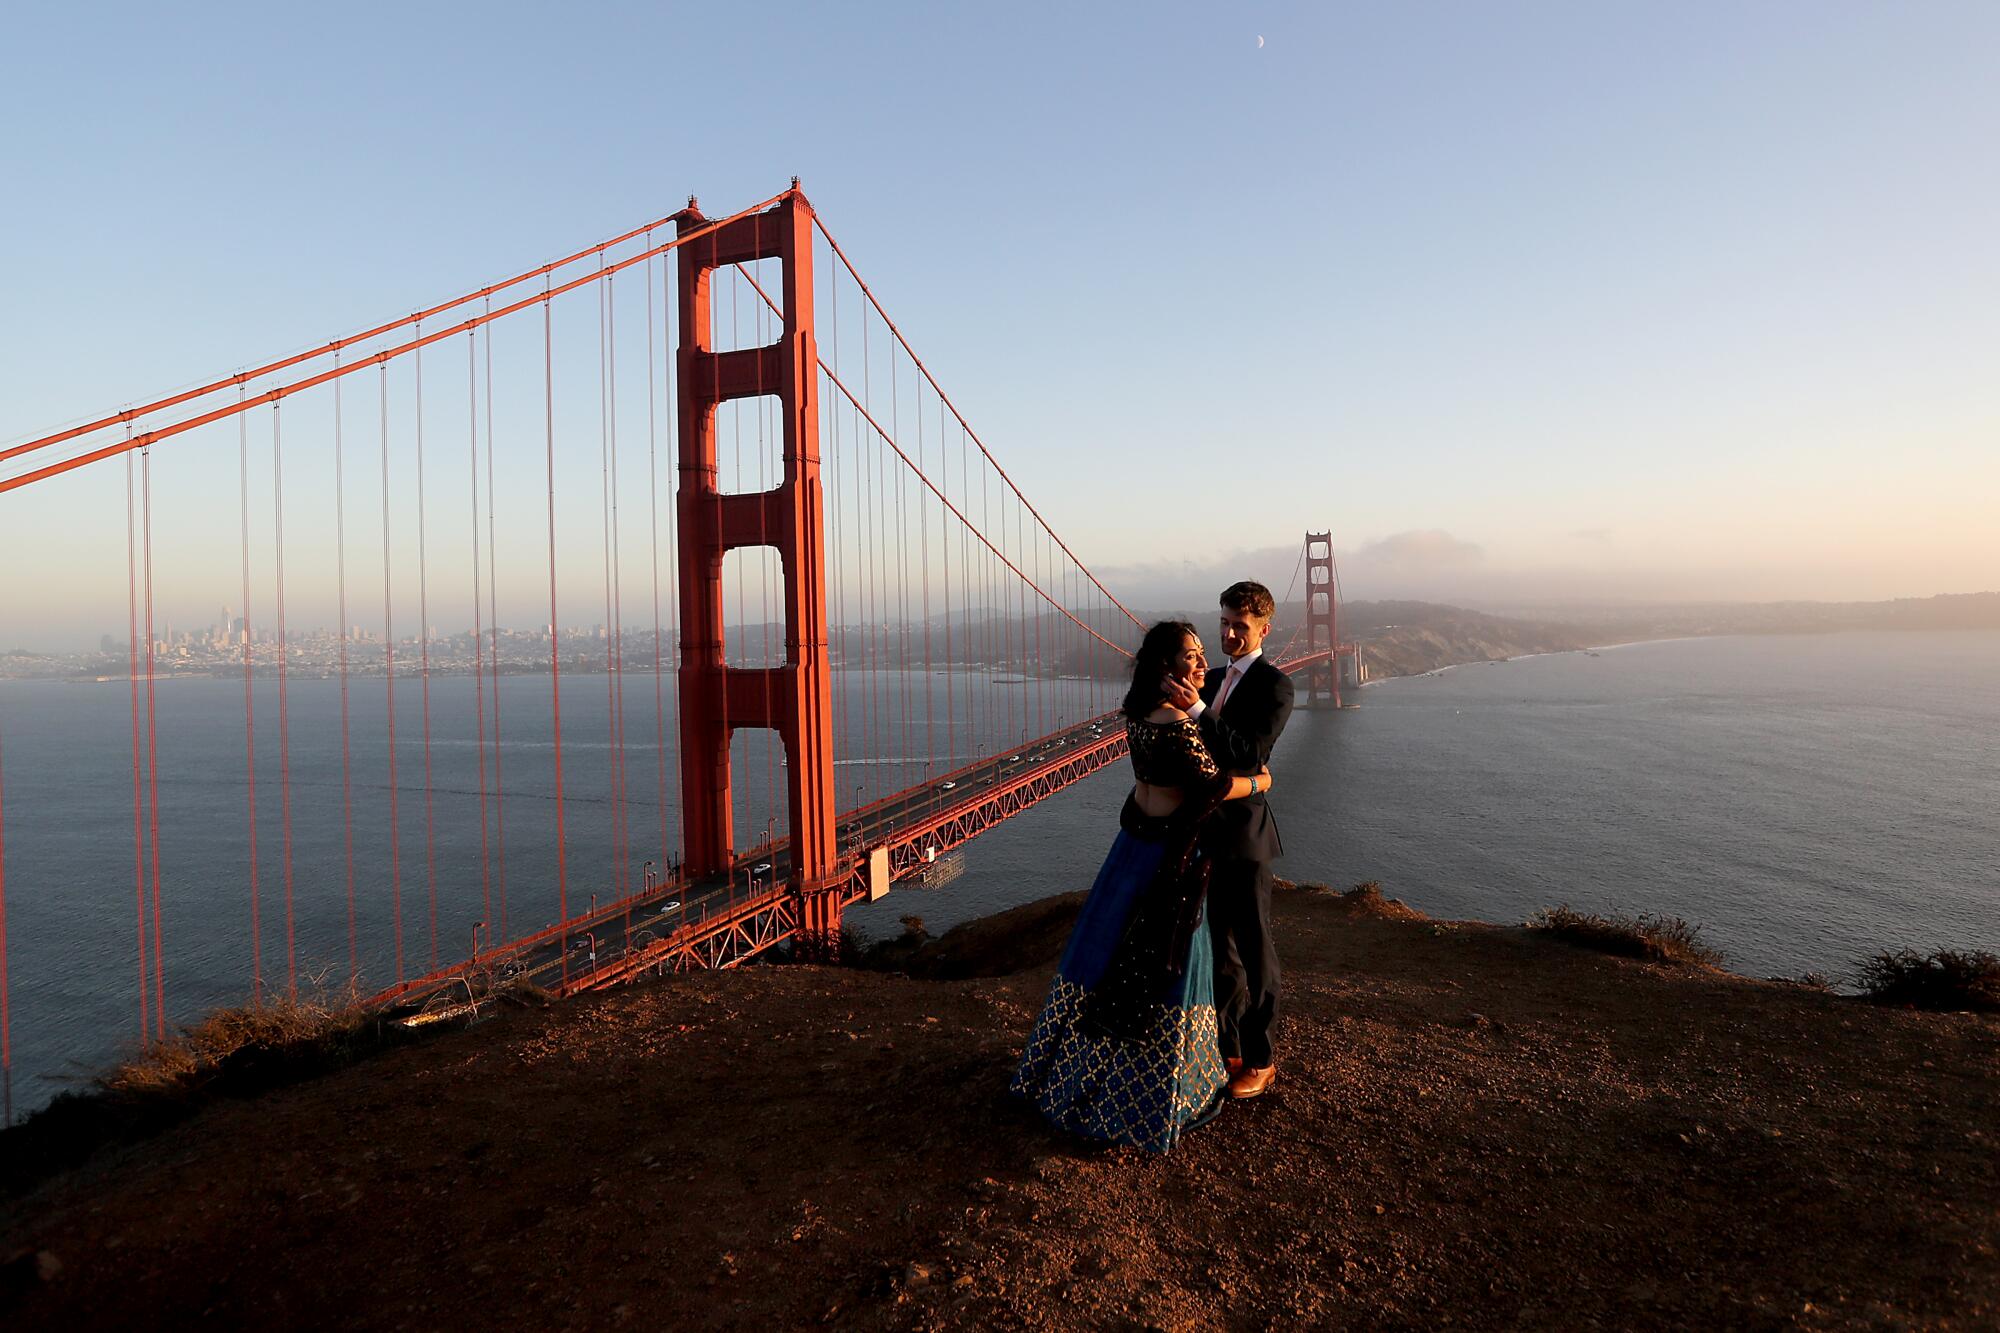 Newlyweds Tulika Jha and Mike Borden take in the sunset at an overlook above the Golden Gate Bridge in San Francisco.